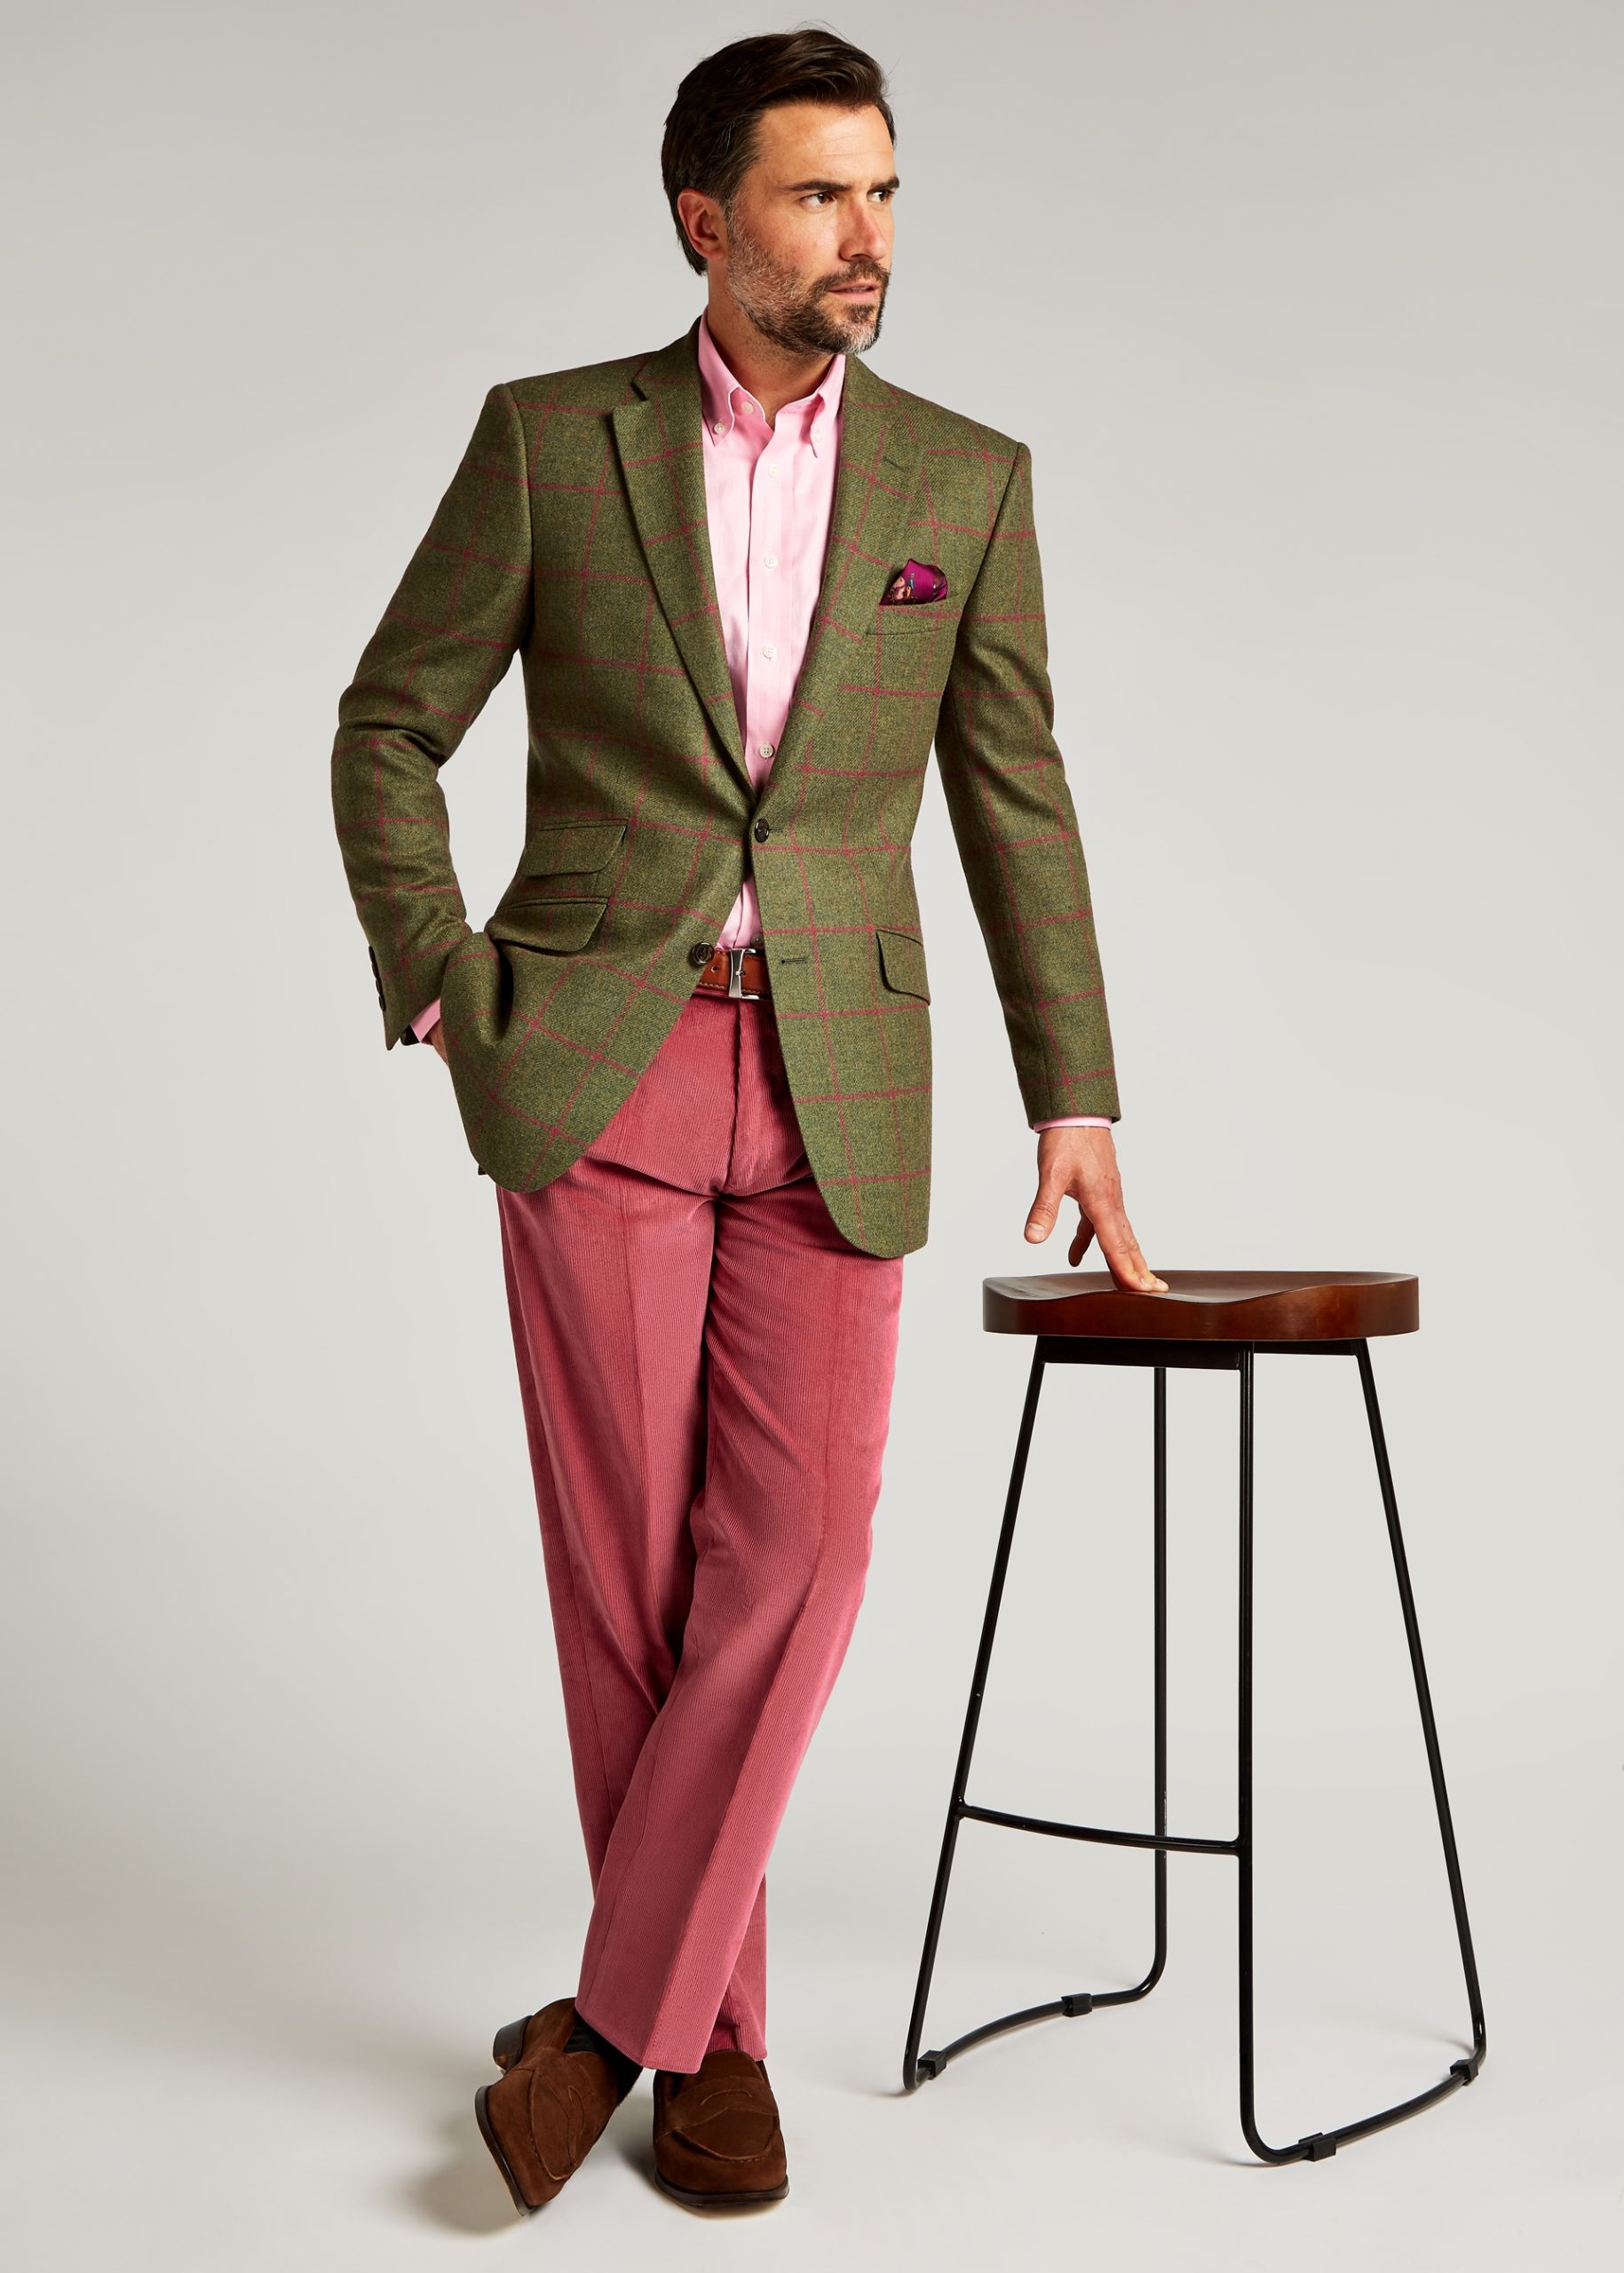 Roderick Charles tailored fit tweed jacket in green and pick with four button cuff